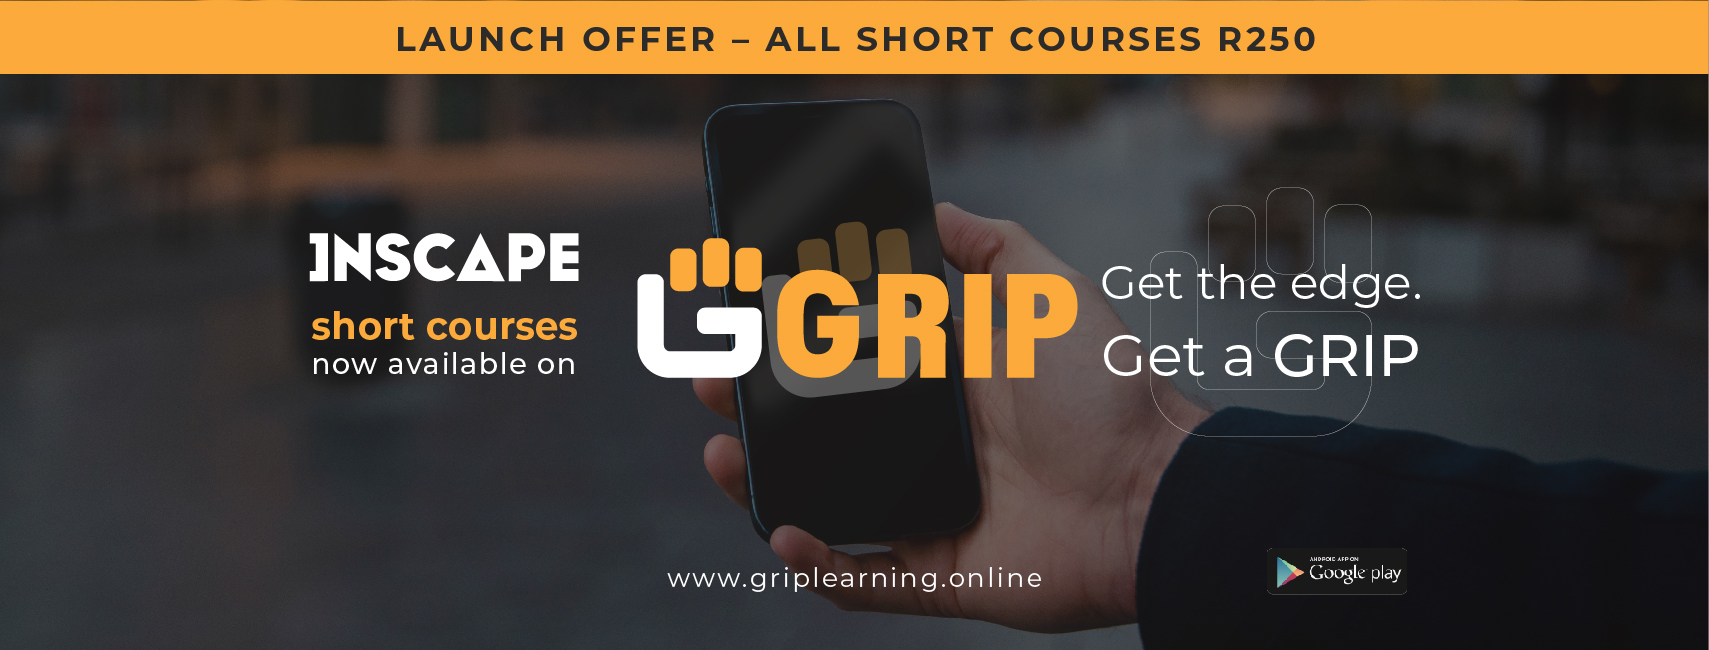 GRIP Learning